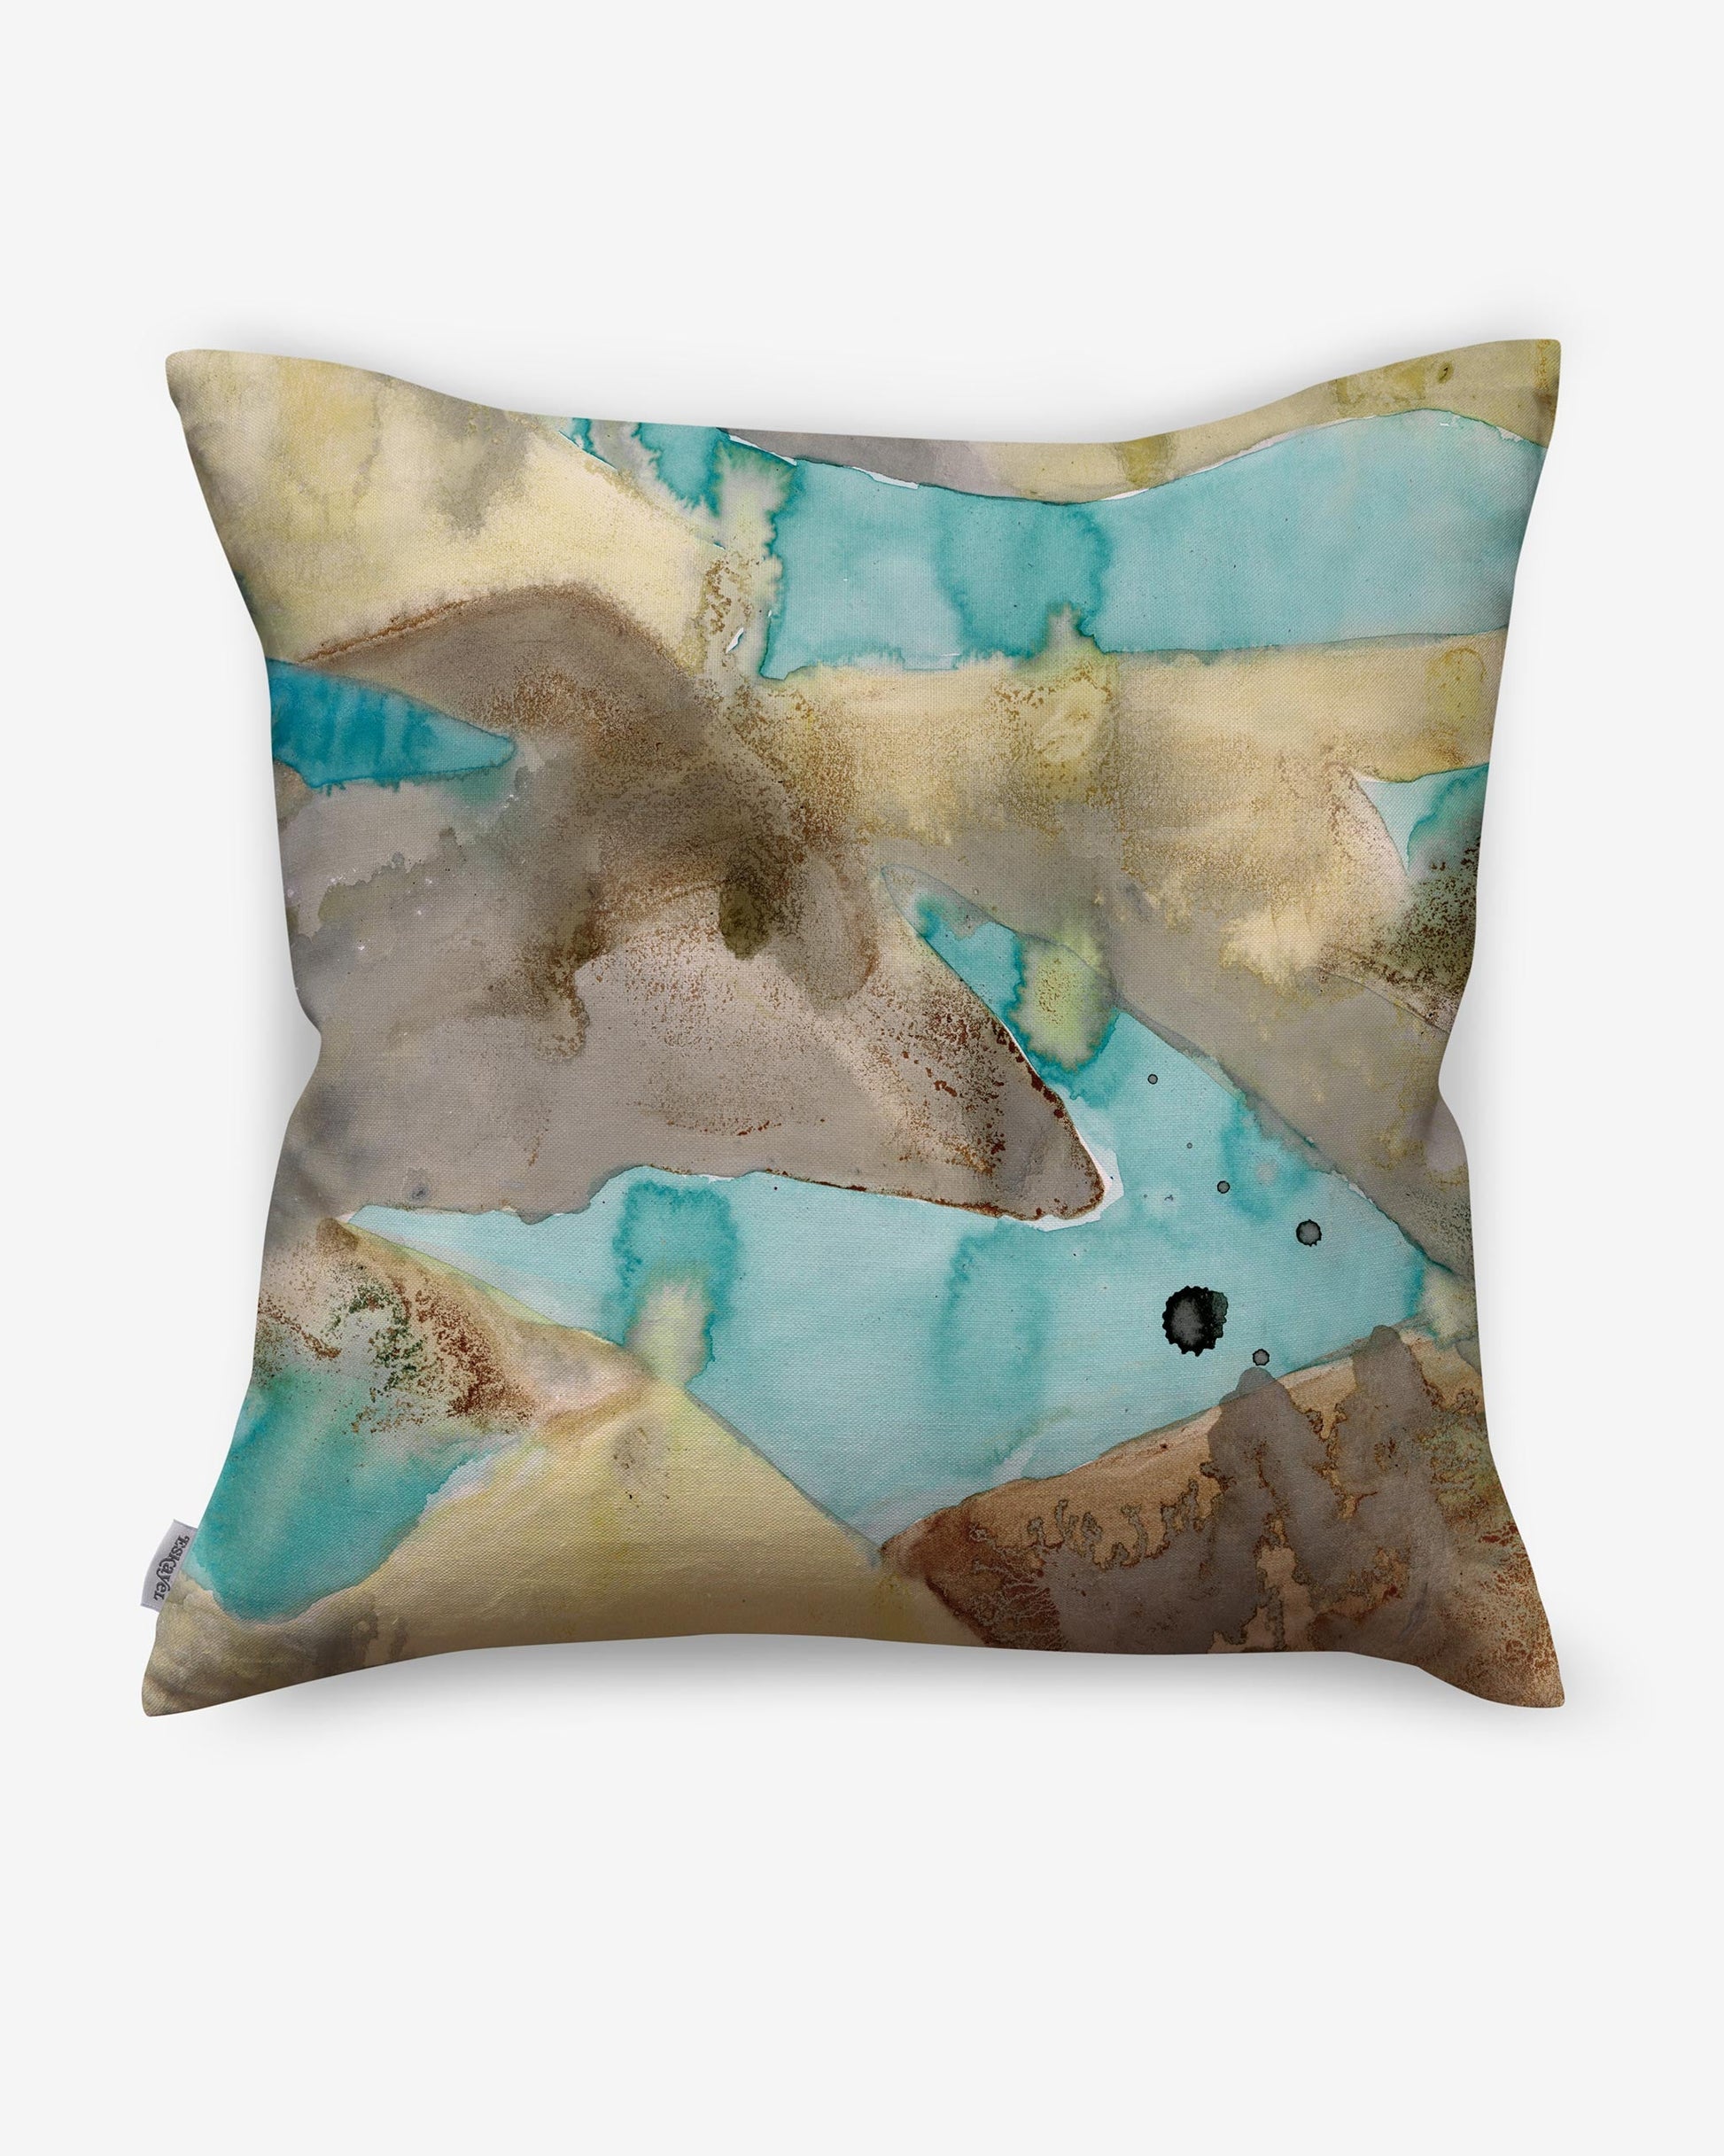 A luxurious Mani Pillow Sage with a blue and brown Mani abstract painting on it